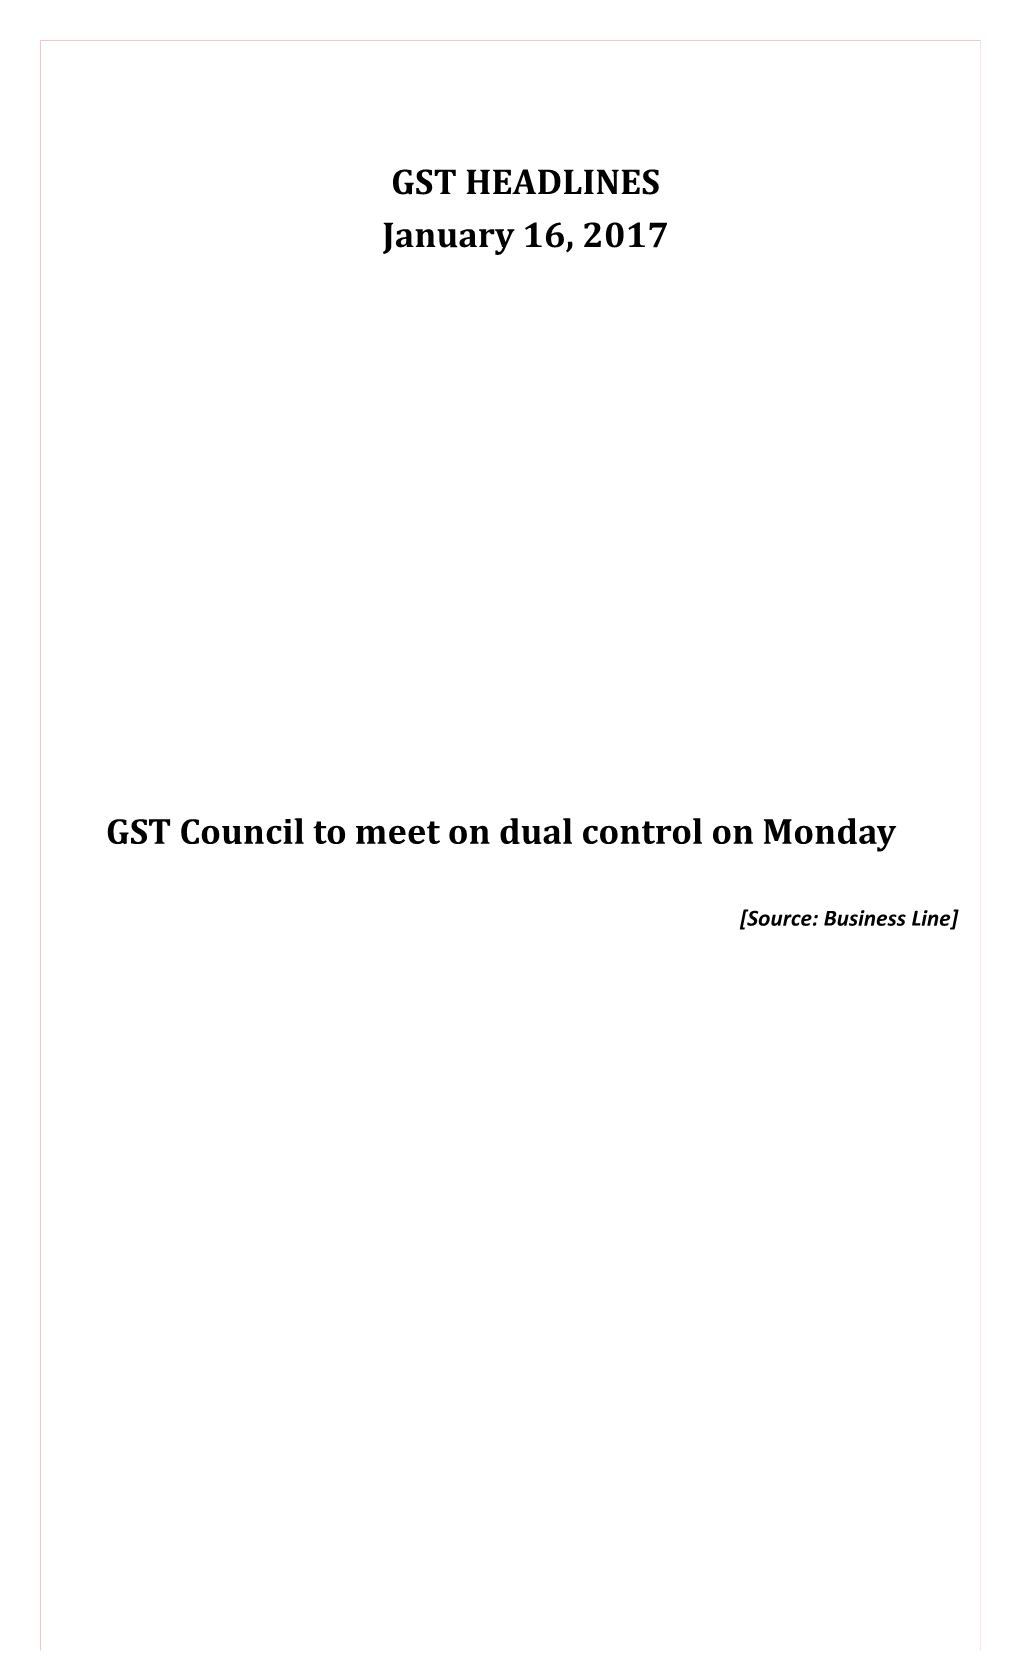 GST Council to Meet on Dual Control on Monday